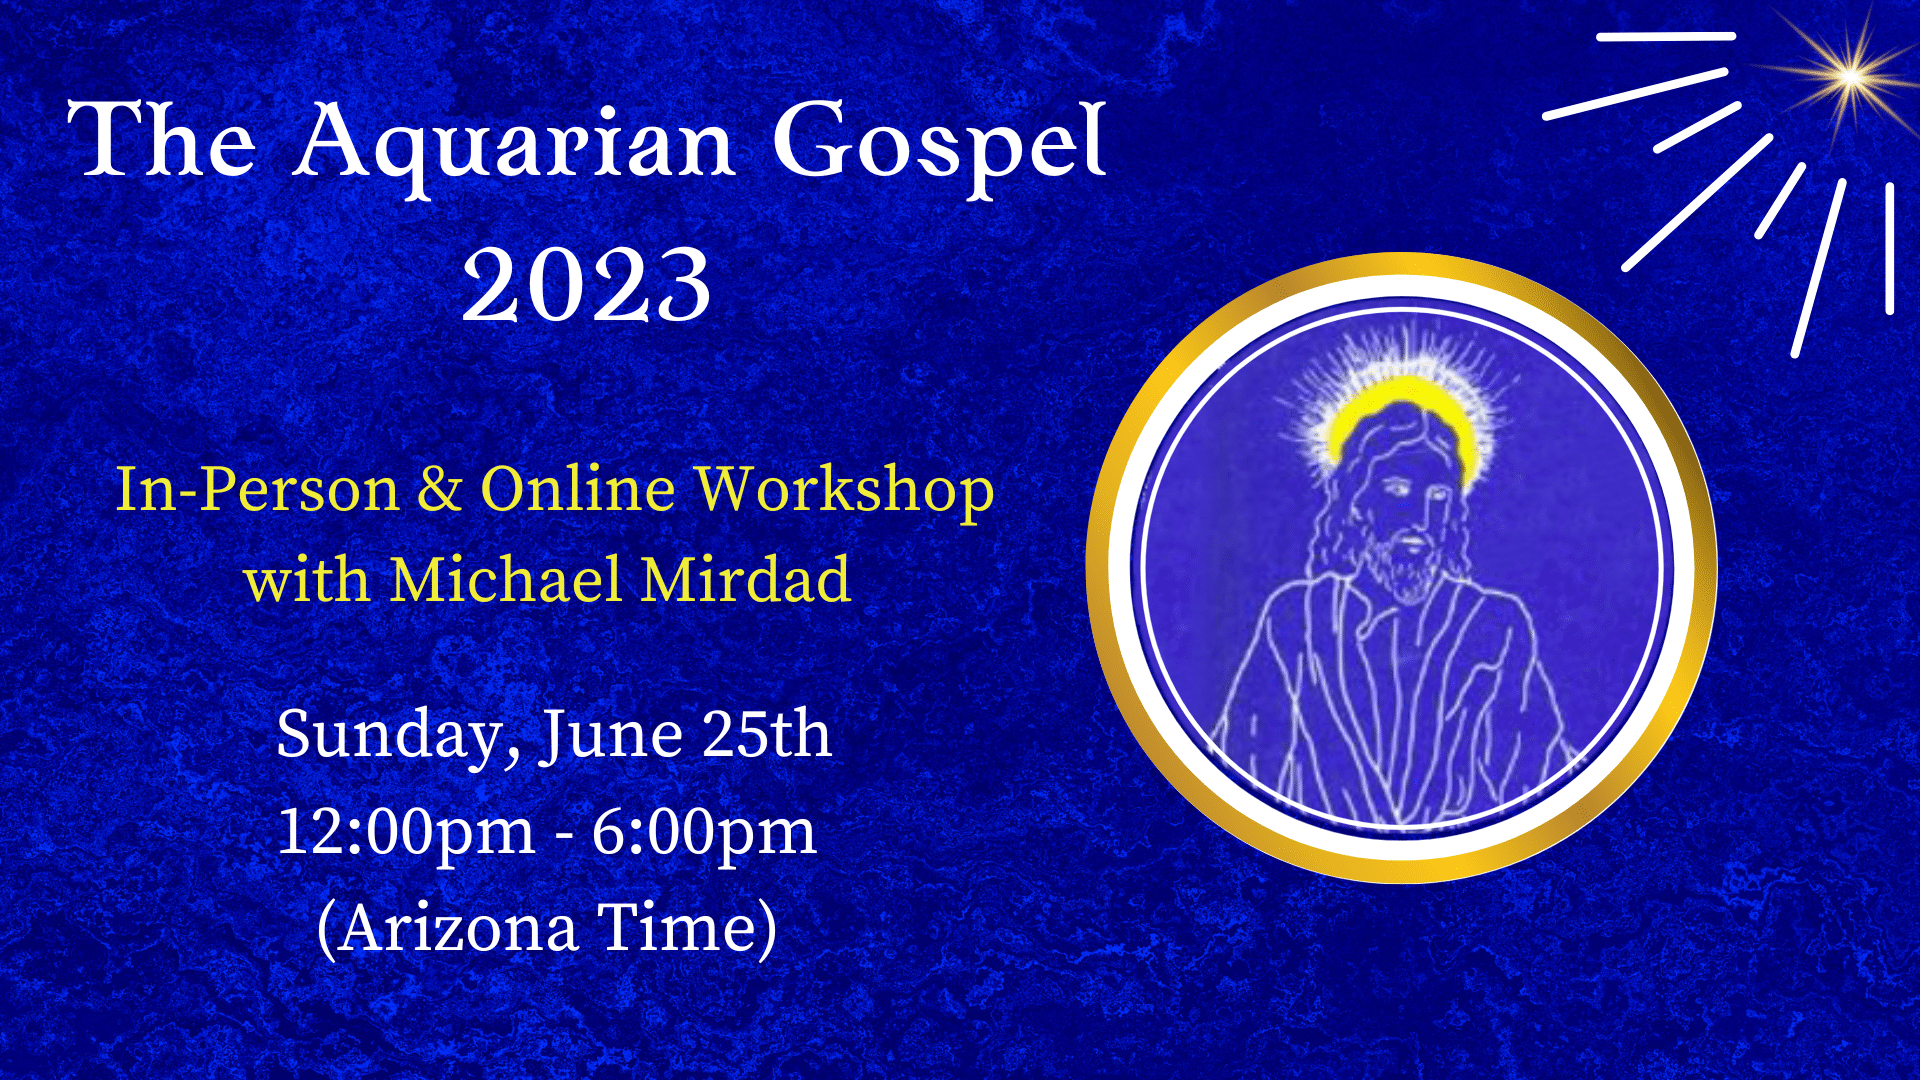 The Aquarian Gospel 2022 with Michael Mitchell brings inner peace and spiritual healing.